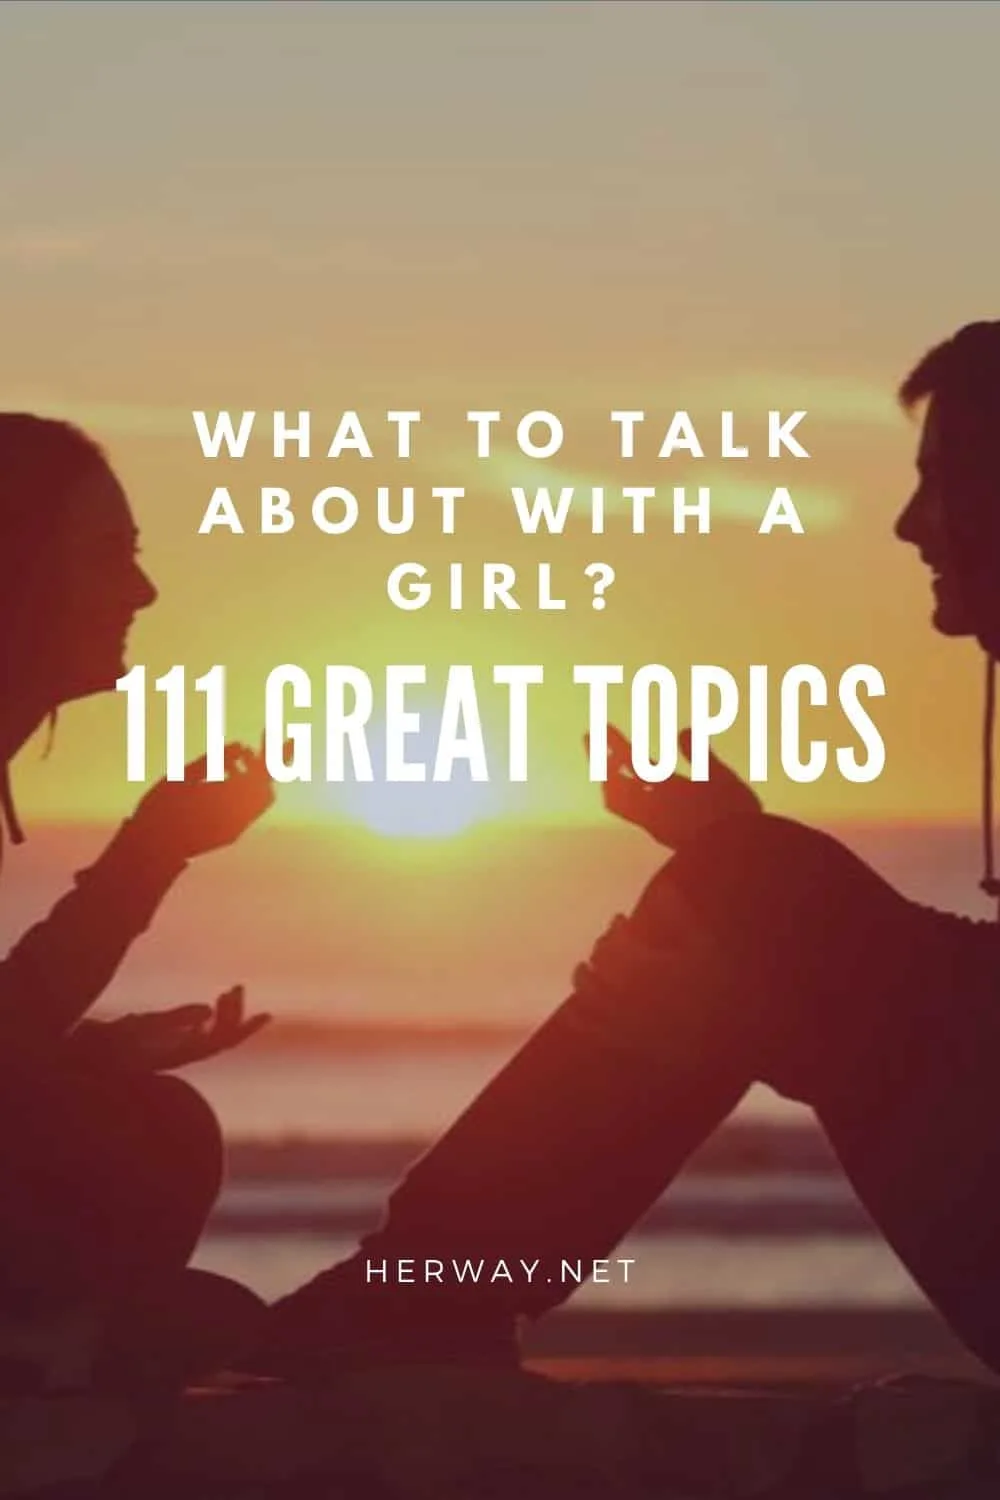 What To Talk About With A Girl? 111 Great Topics